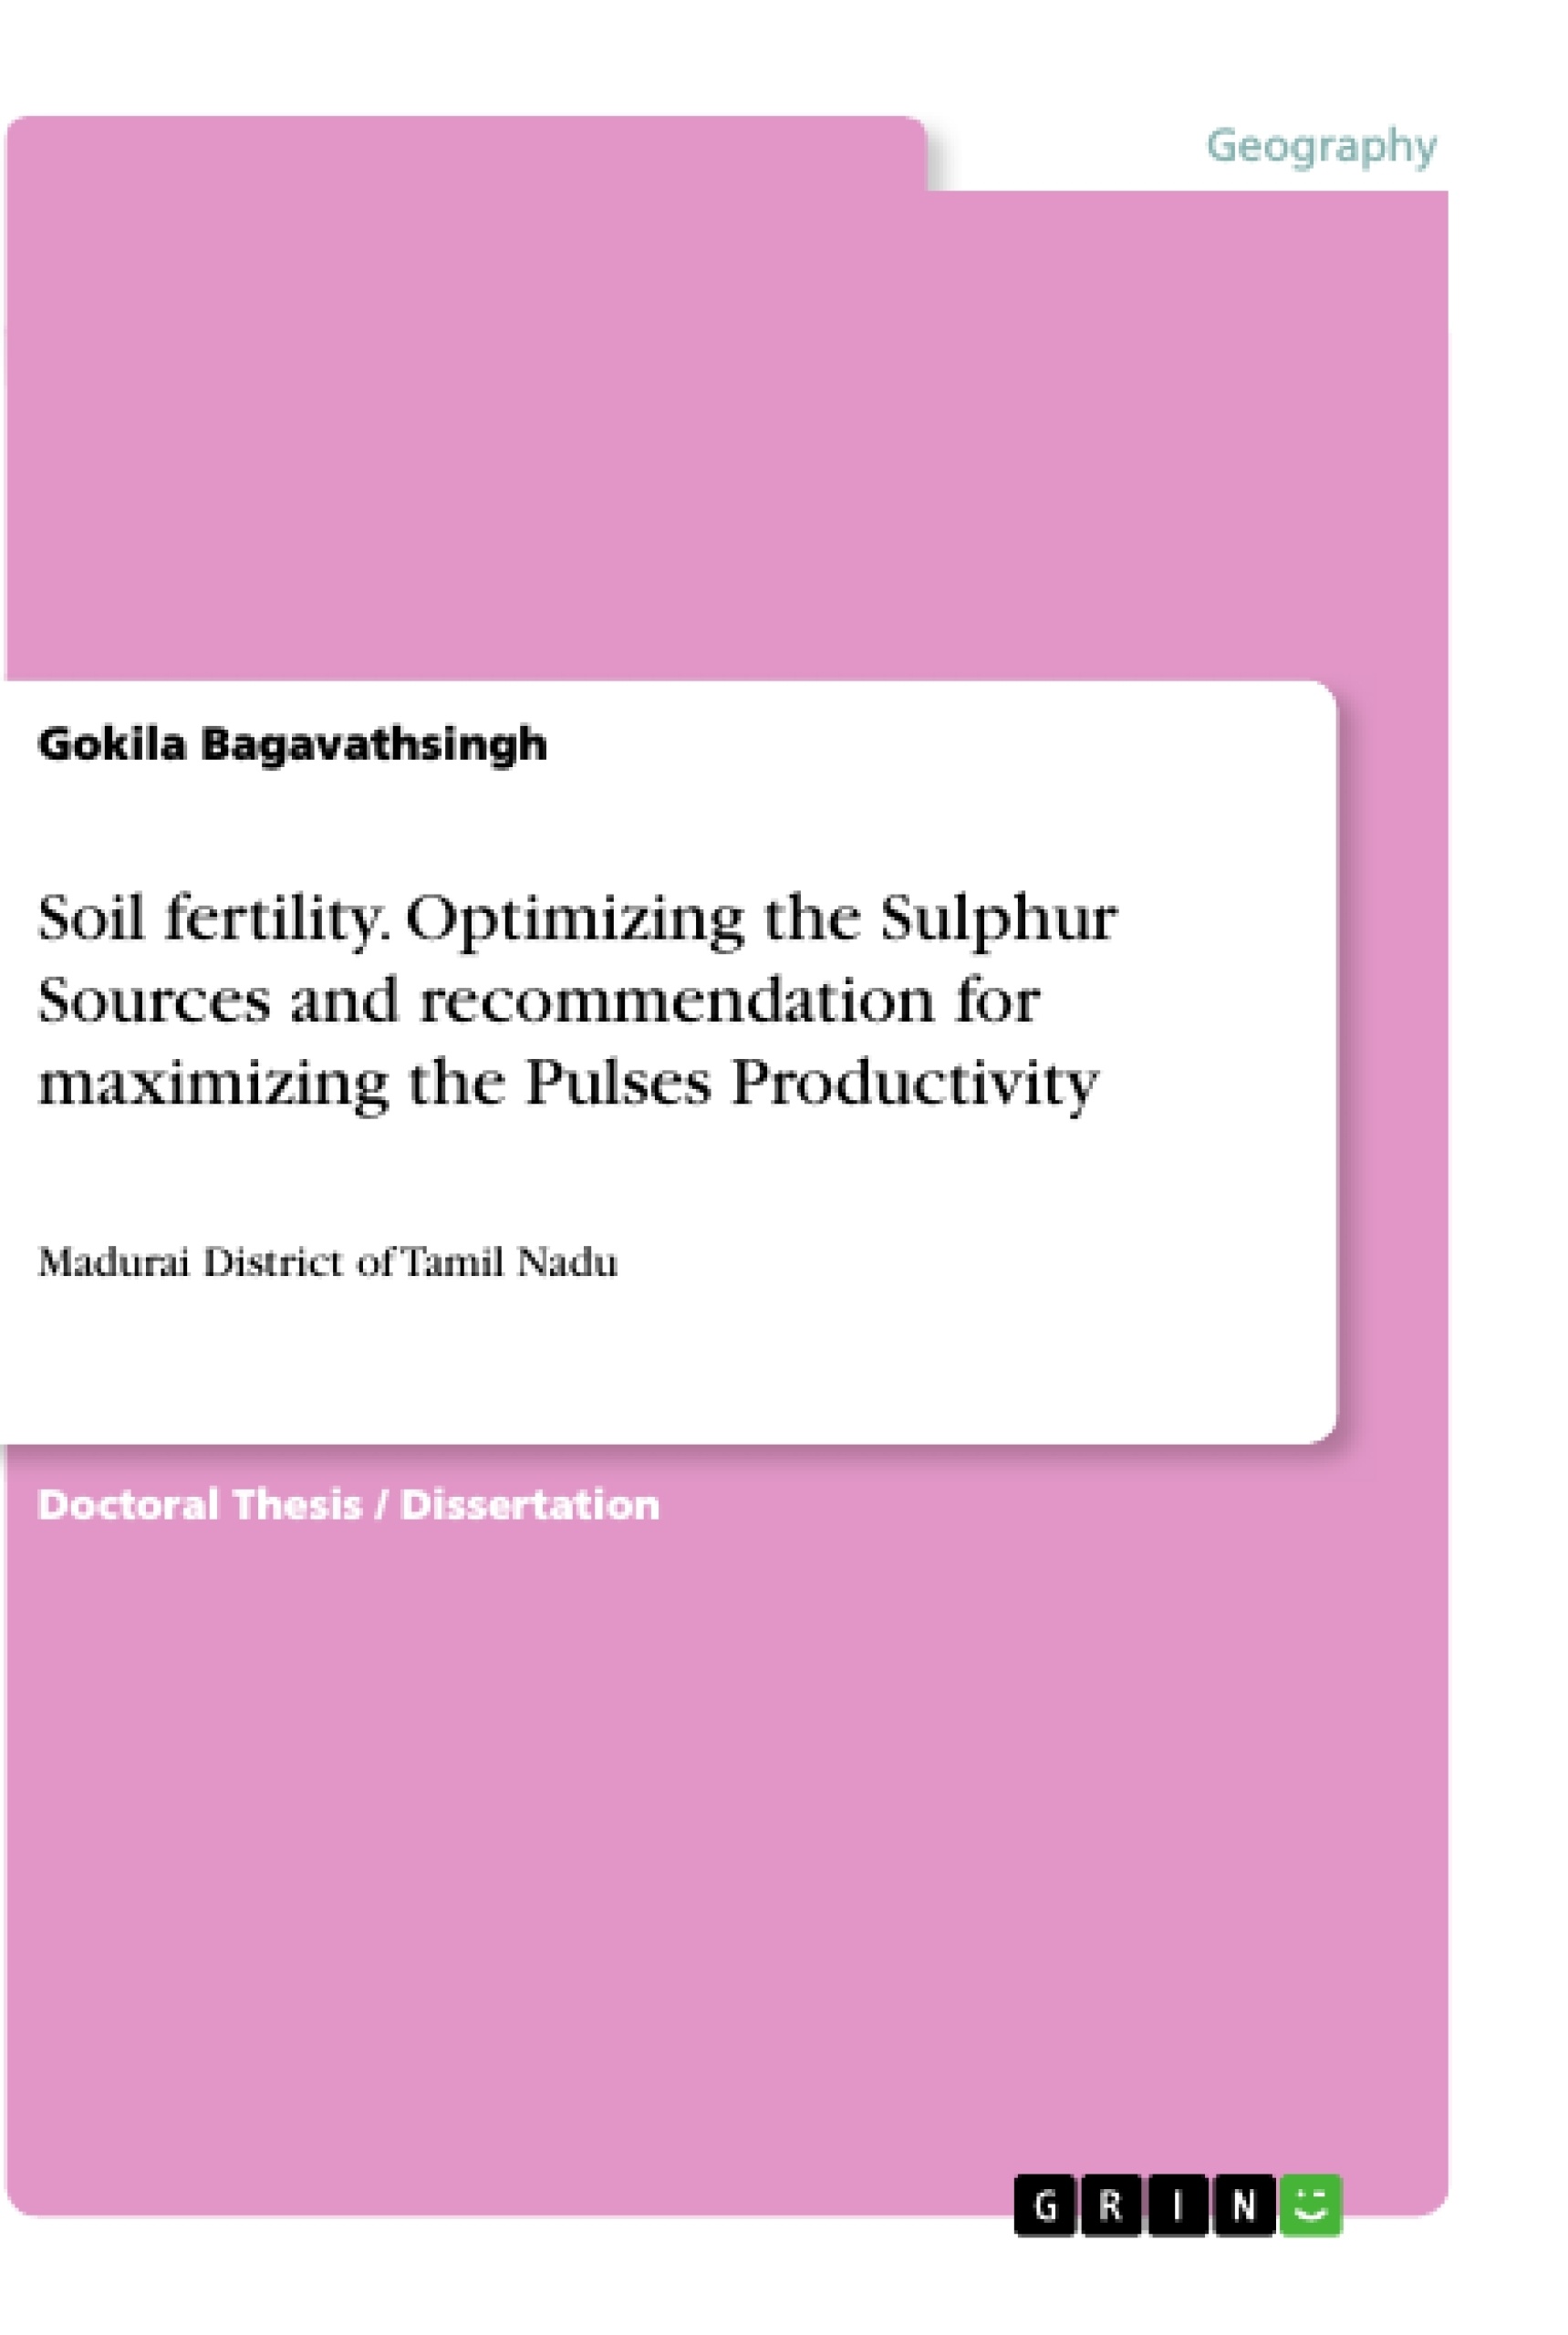 Título: Soil fertility. Optimizing the Sulphur Sources and recommendation for maximizing the Pulses Productivity